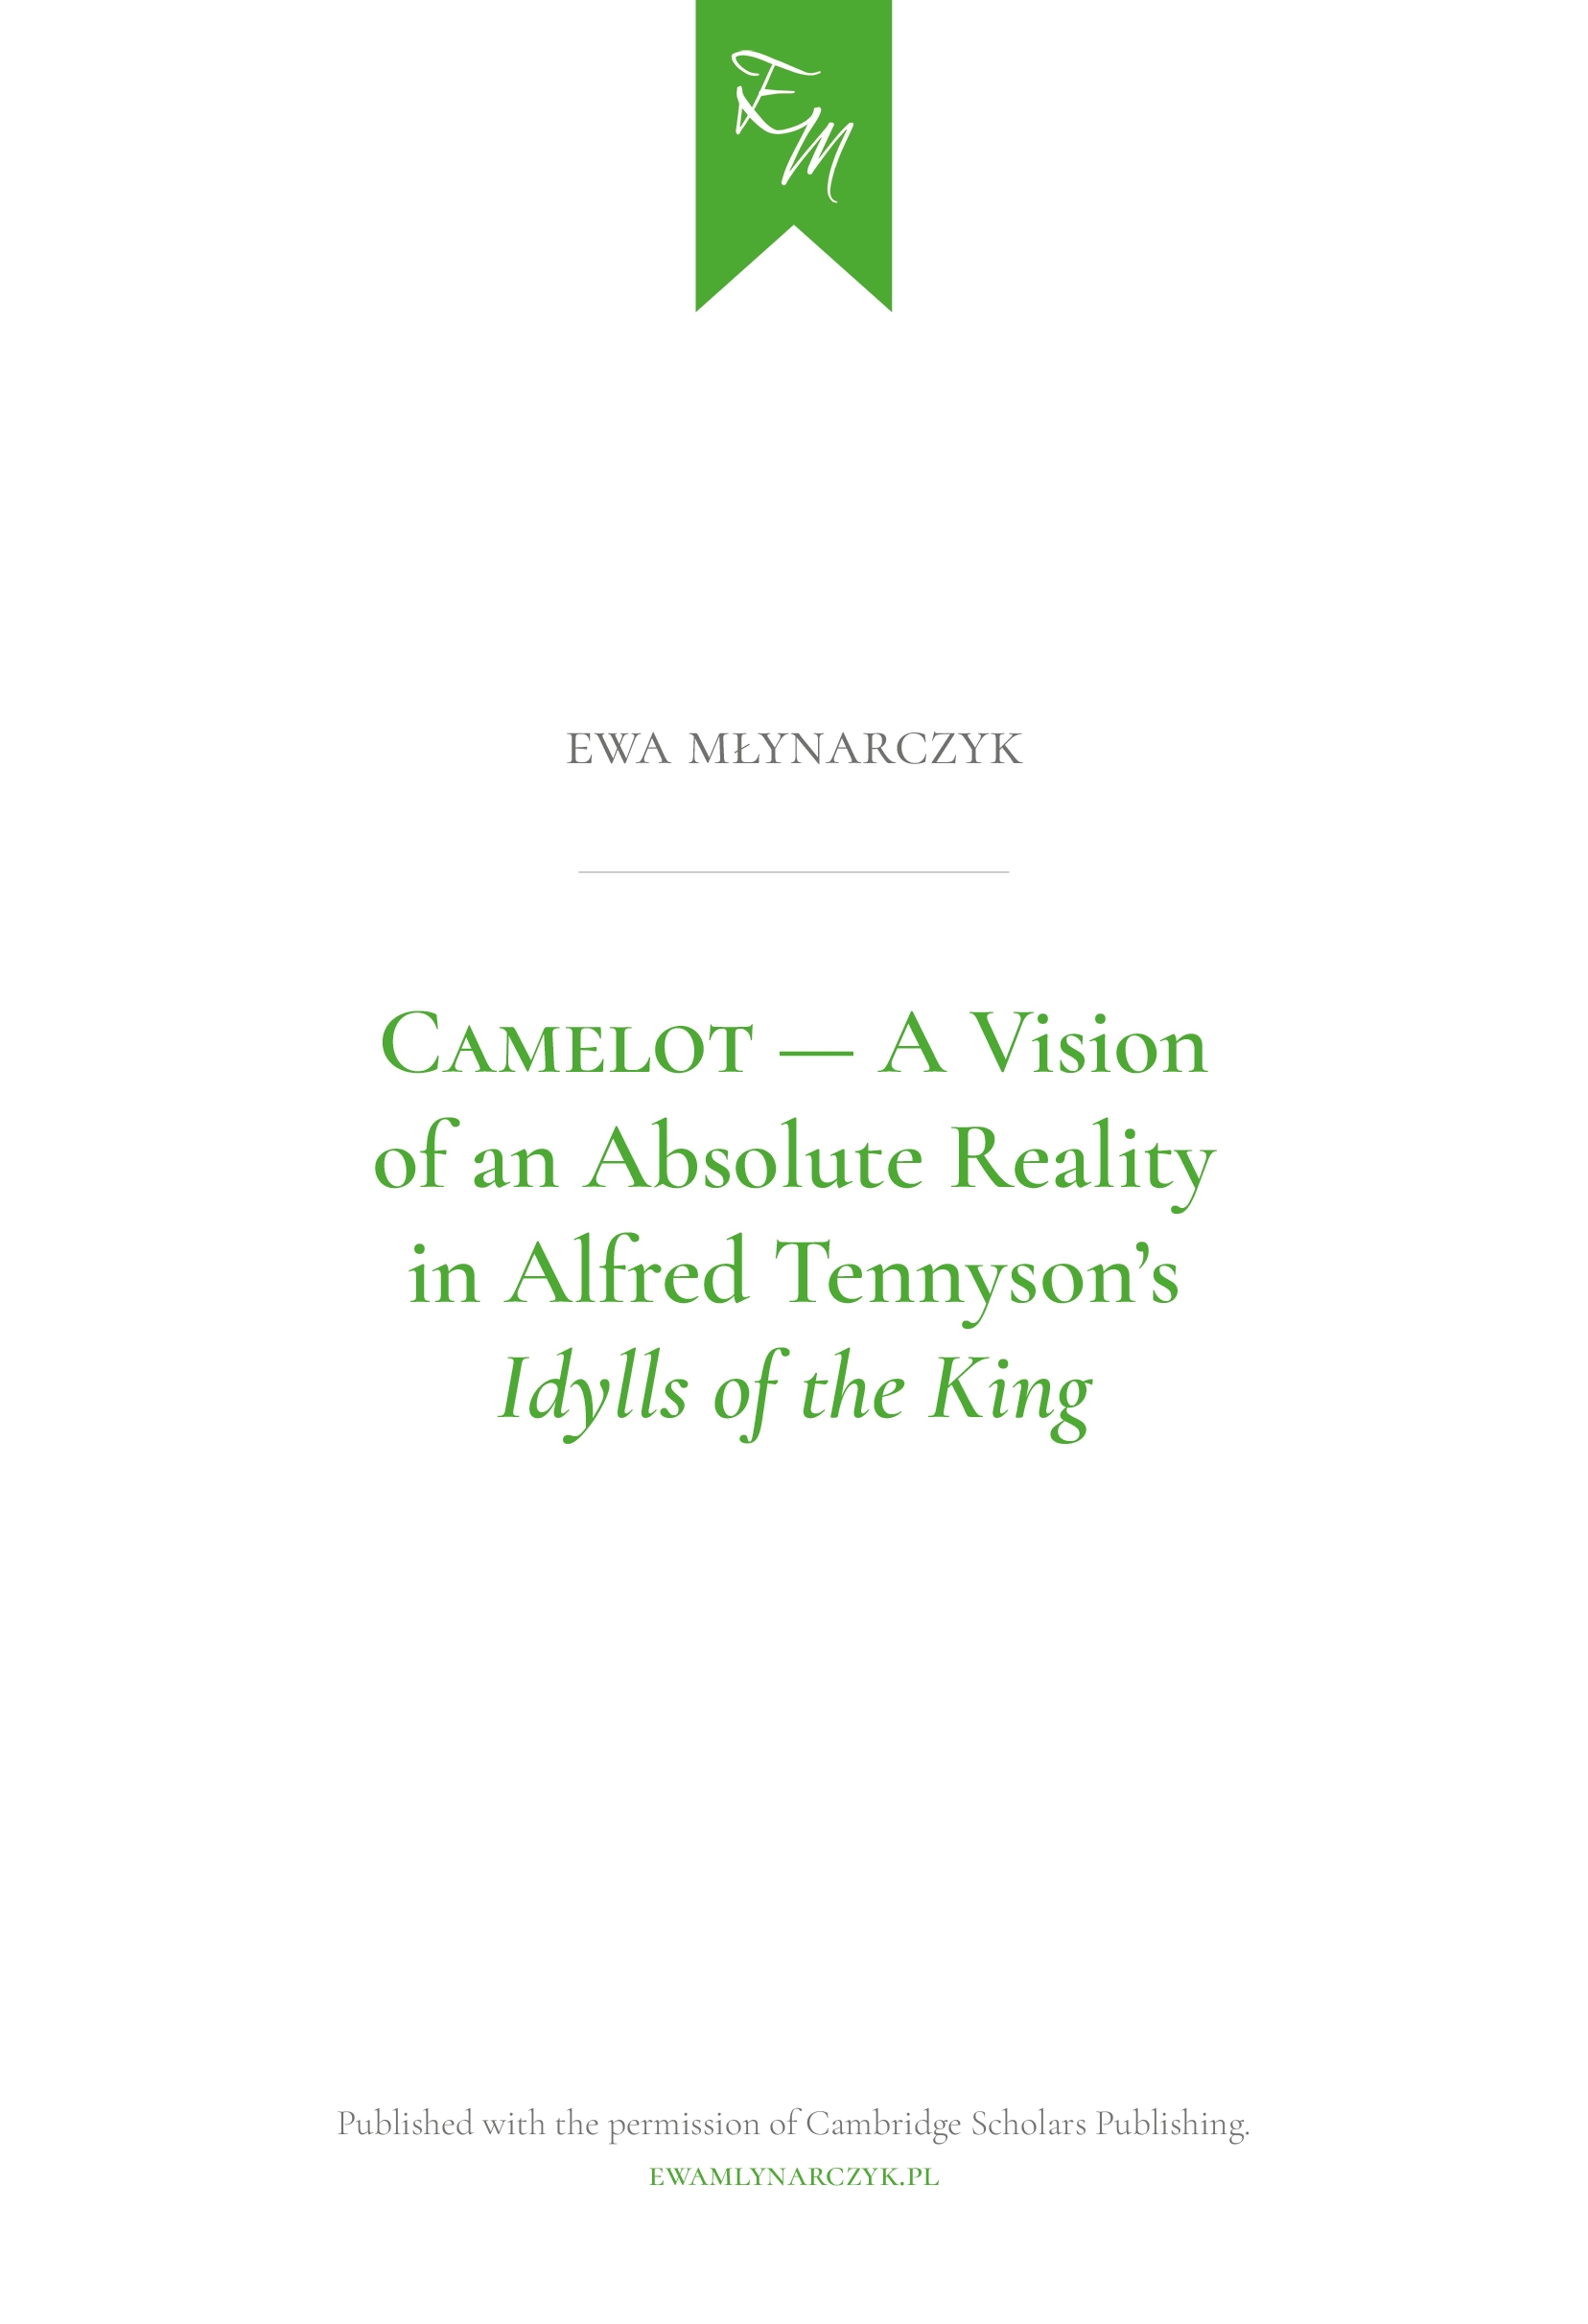 Articles by Ewa Młynarczyk / Artykuły Ewy Młynarczyk: Camelot - A Vision of an Absolute Reality in Alfred Tennyson's "Idylls of the King"